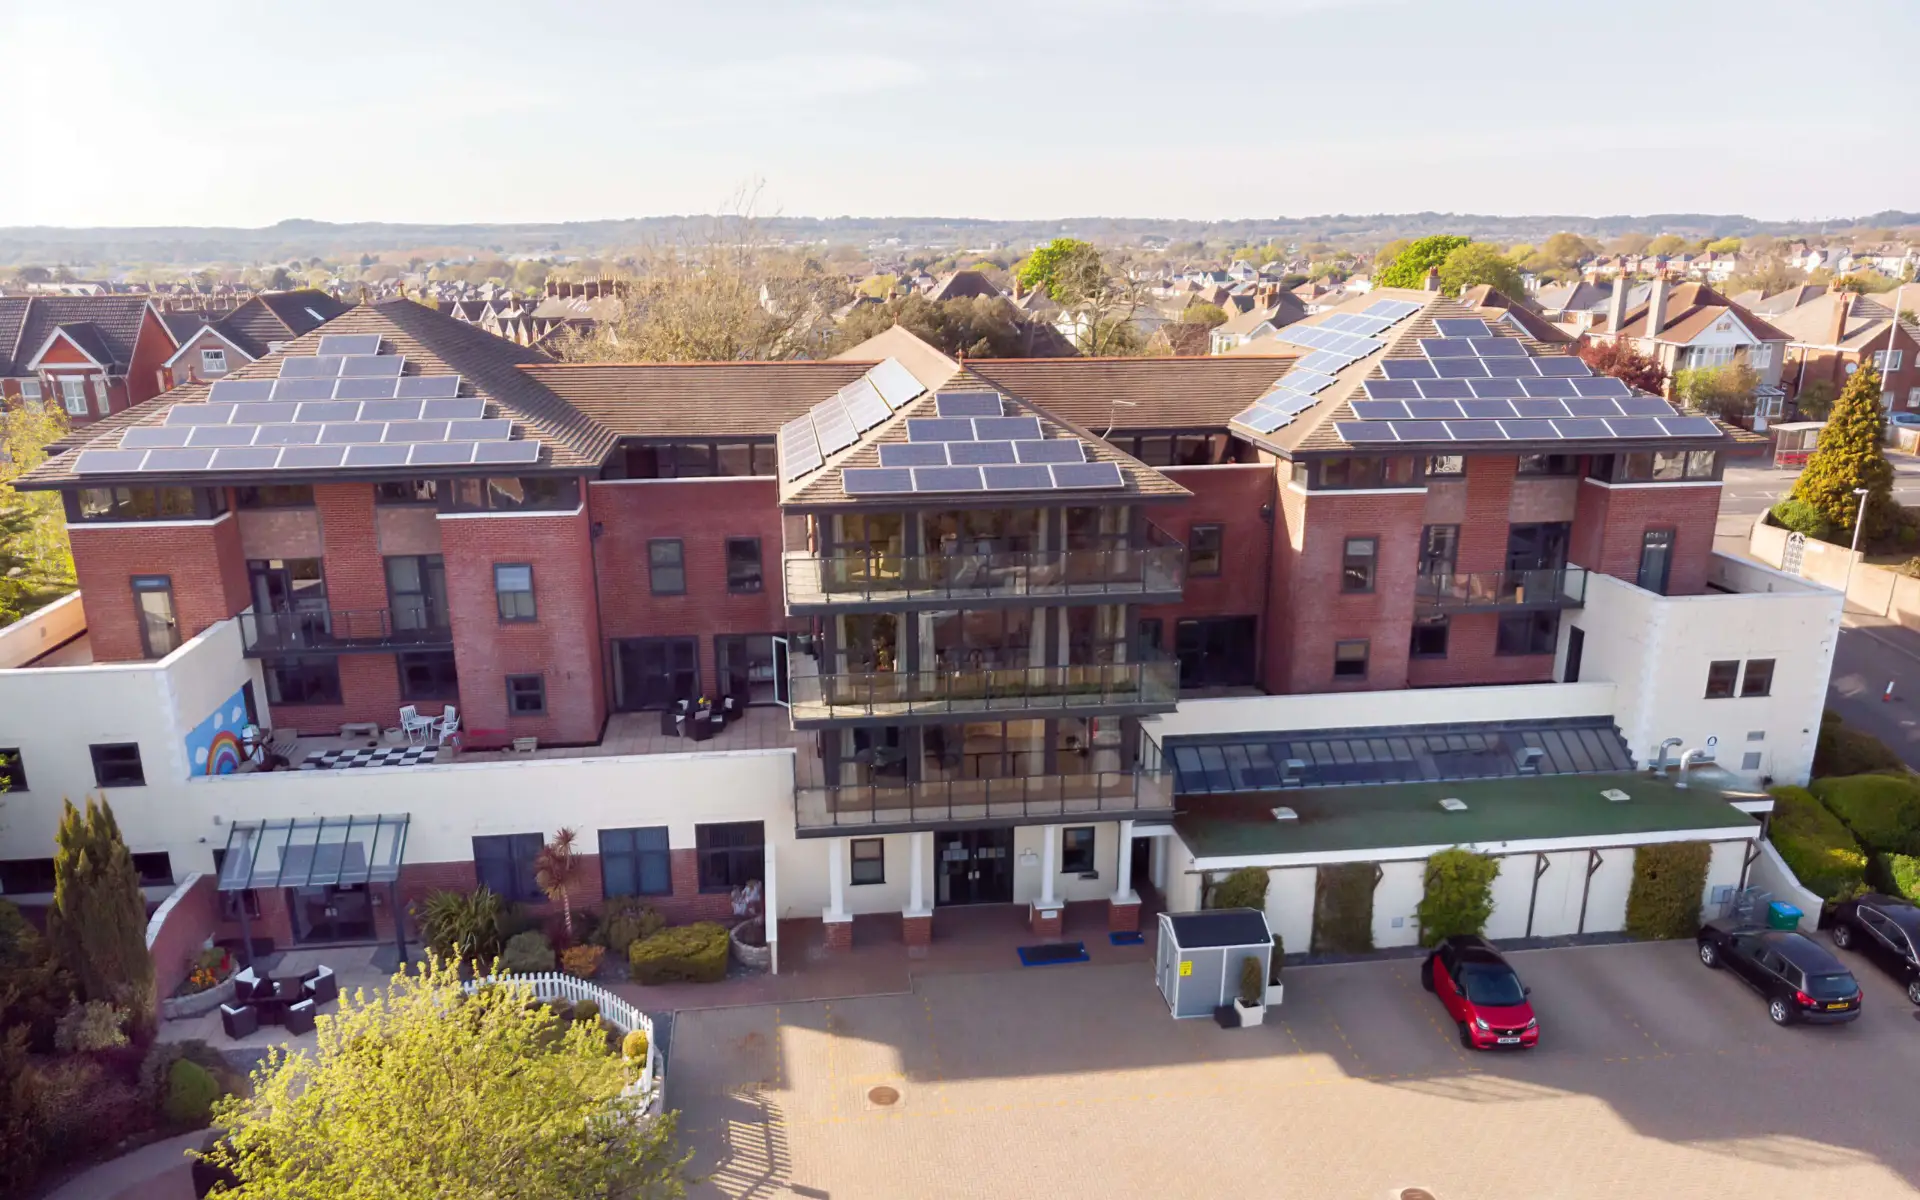 Eagles Mount Care Home with Solar Panels on Roof